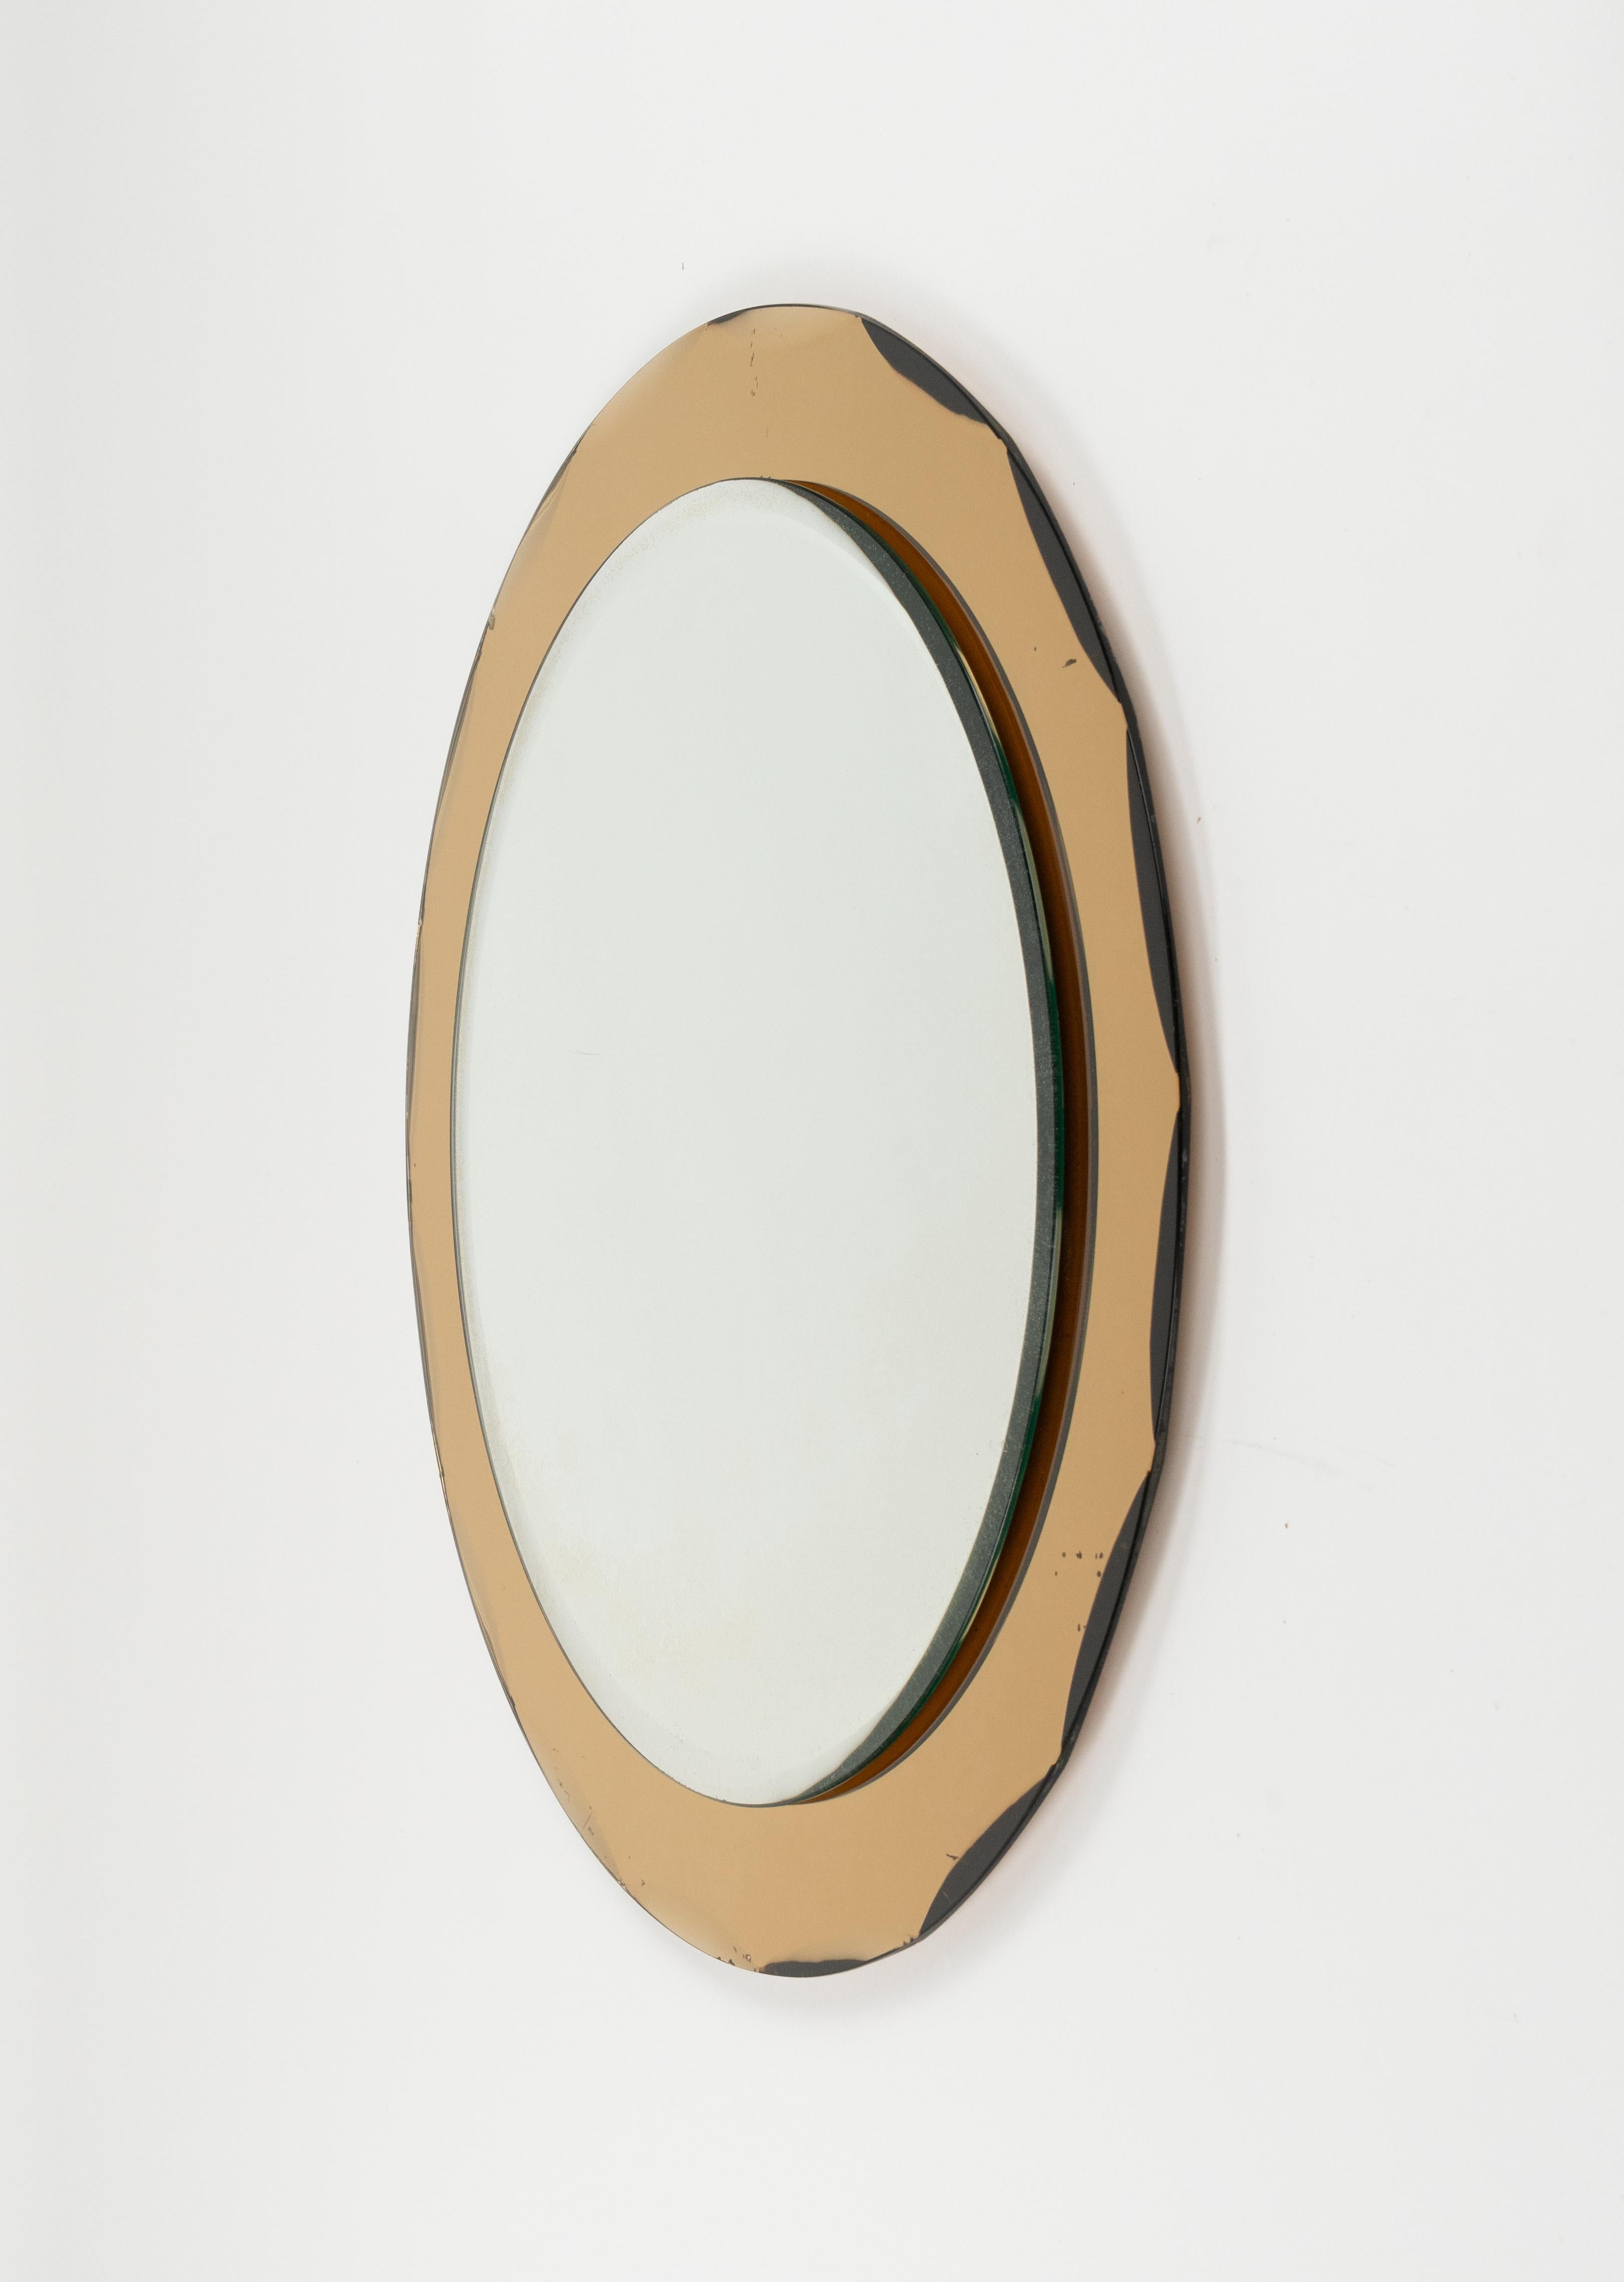 Midcentury amazing round wall mirror with yellow mirror frame and double decreasing beveled by Metalvetro Galvorame.   

Made in Italy in the 1970s. 

The mirror, original of the period, shows small signs of discolouration.